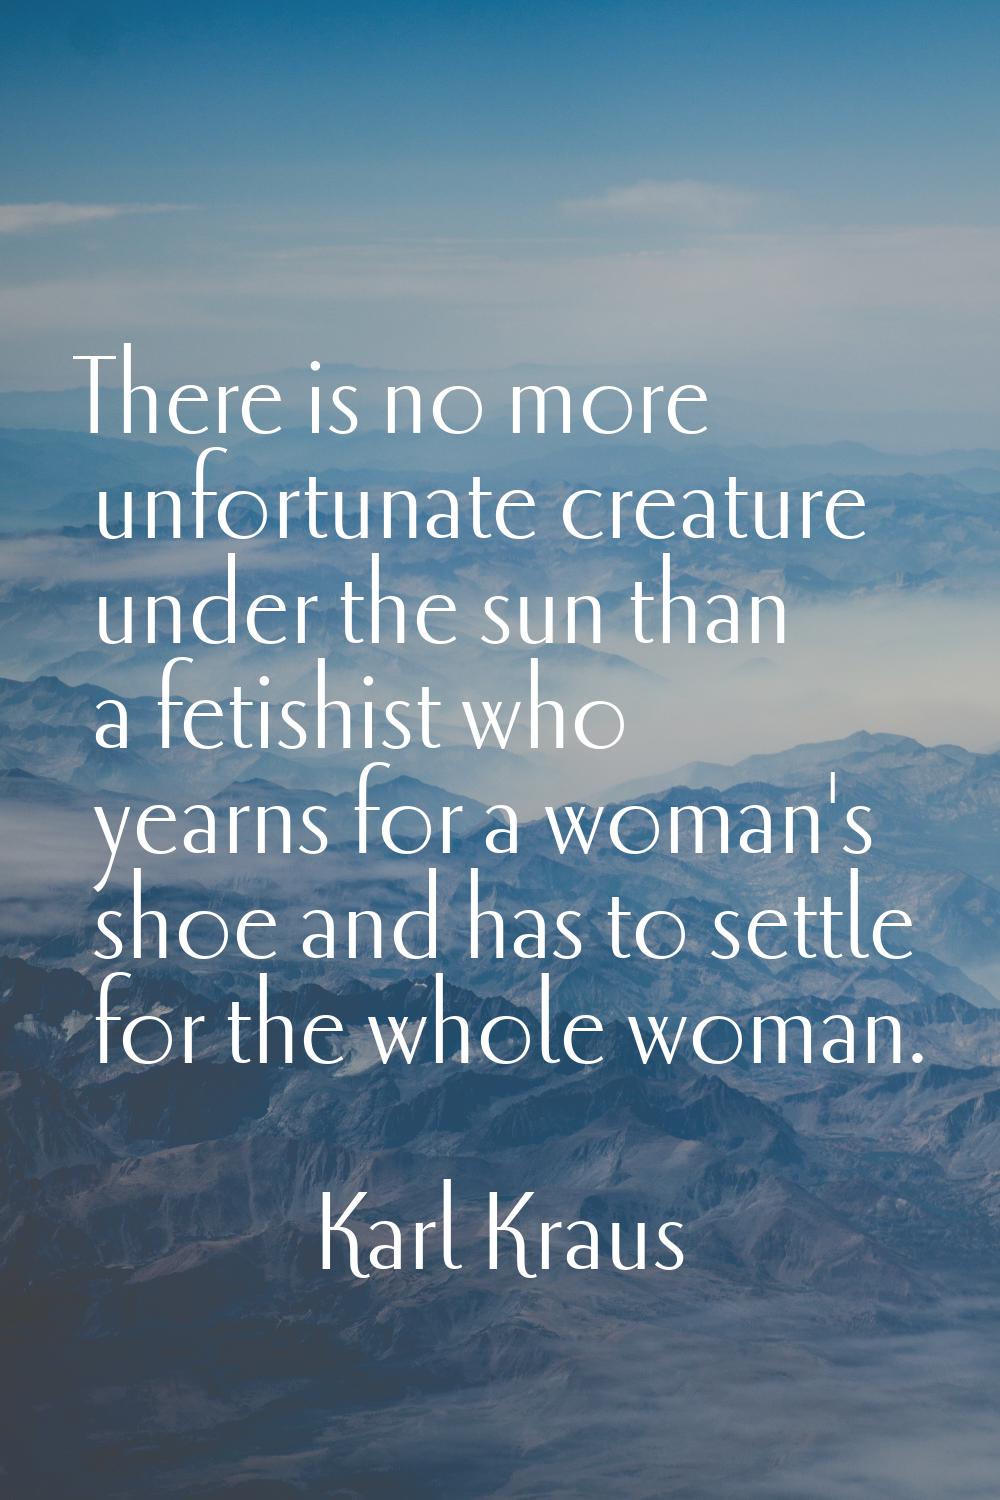 There is no more unfortunate creature under the sun than a fetishist who yearns for a woman's shoe 